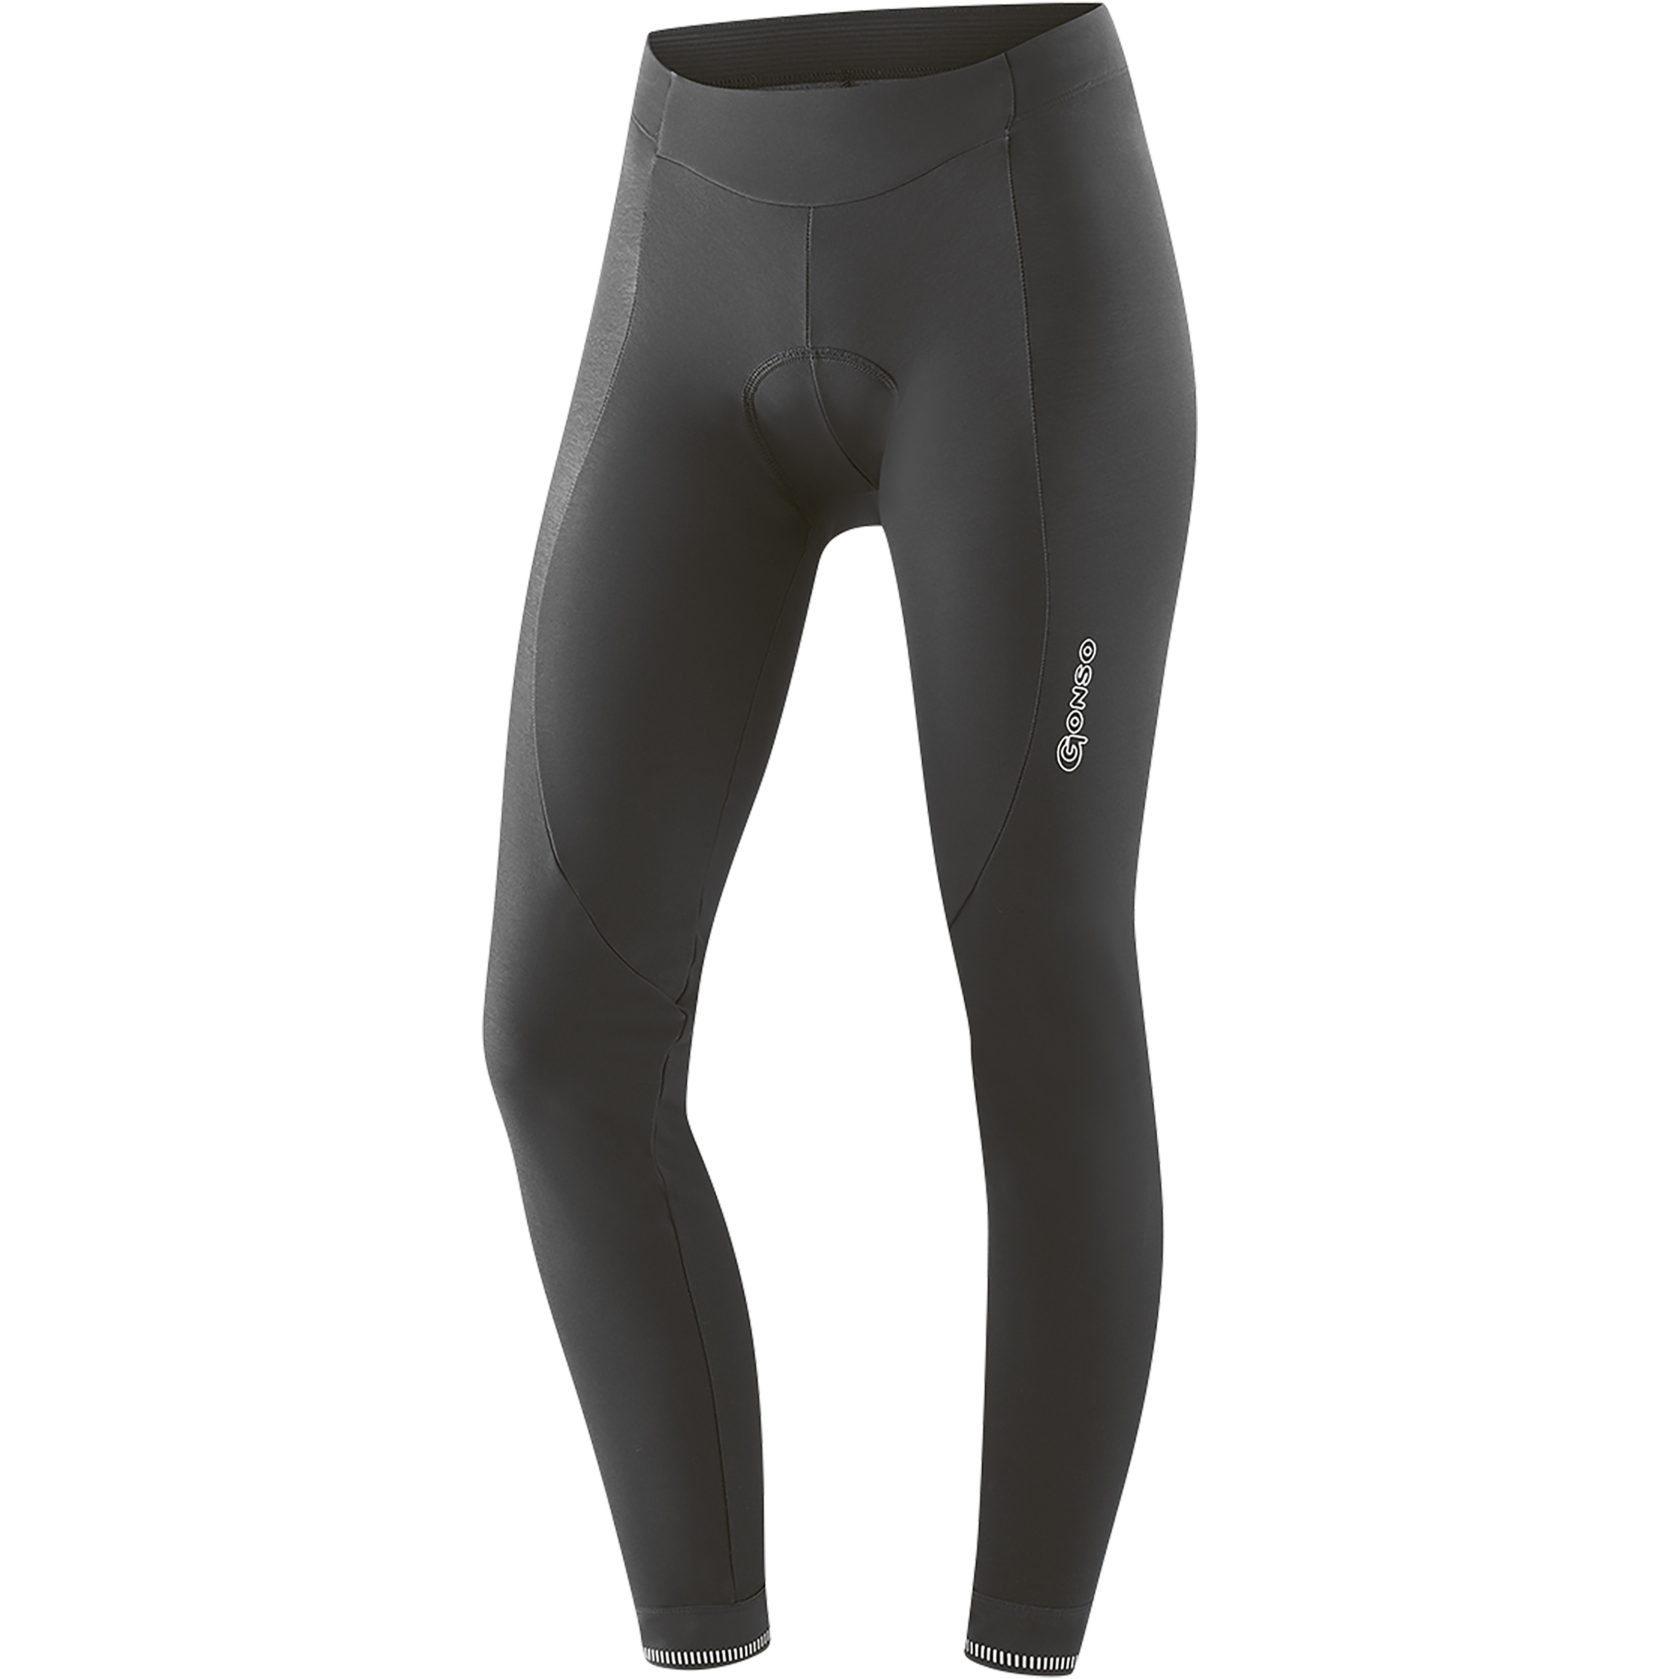 Picture of Gonso SITIVO Blue Thermal Bike Tights Women - Black